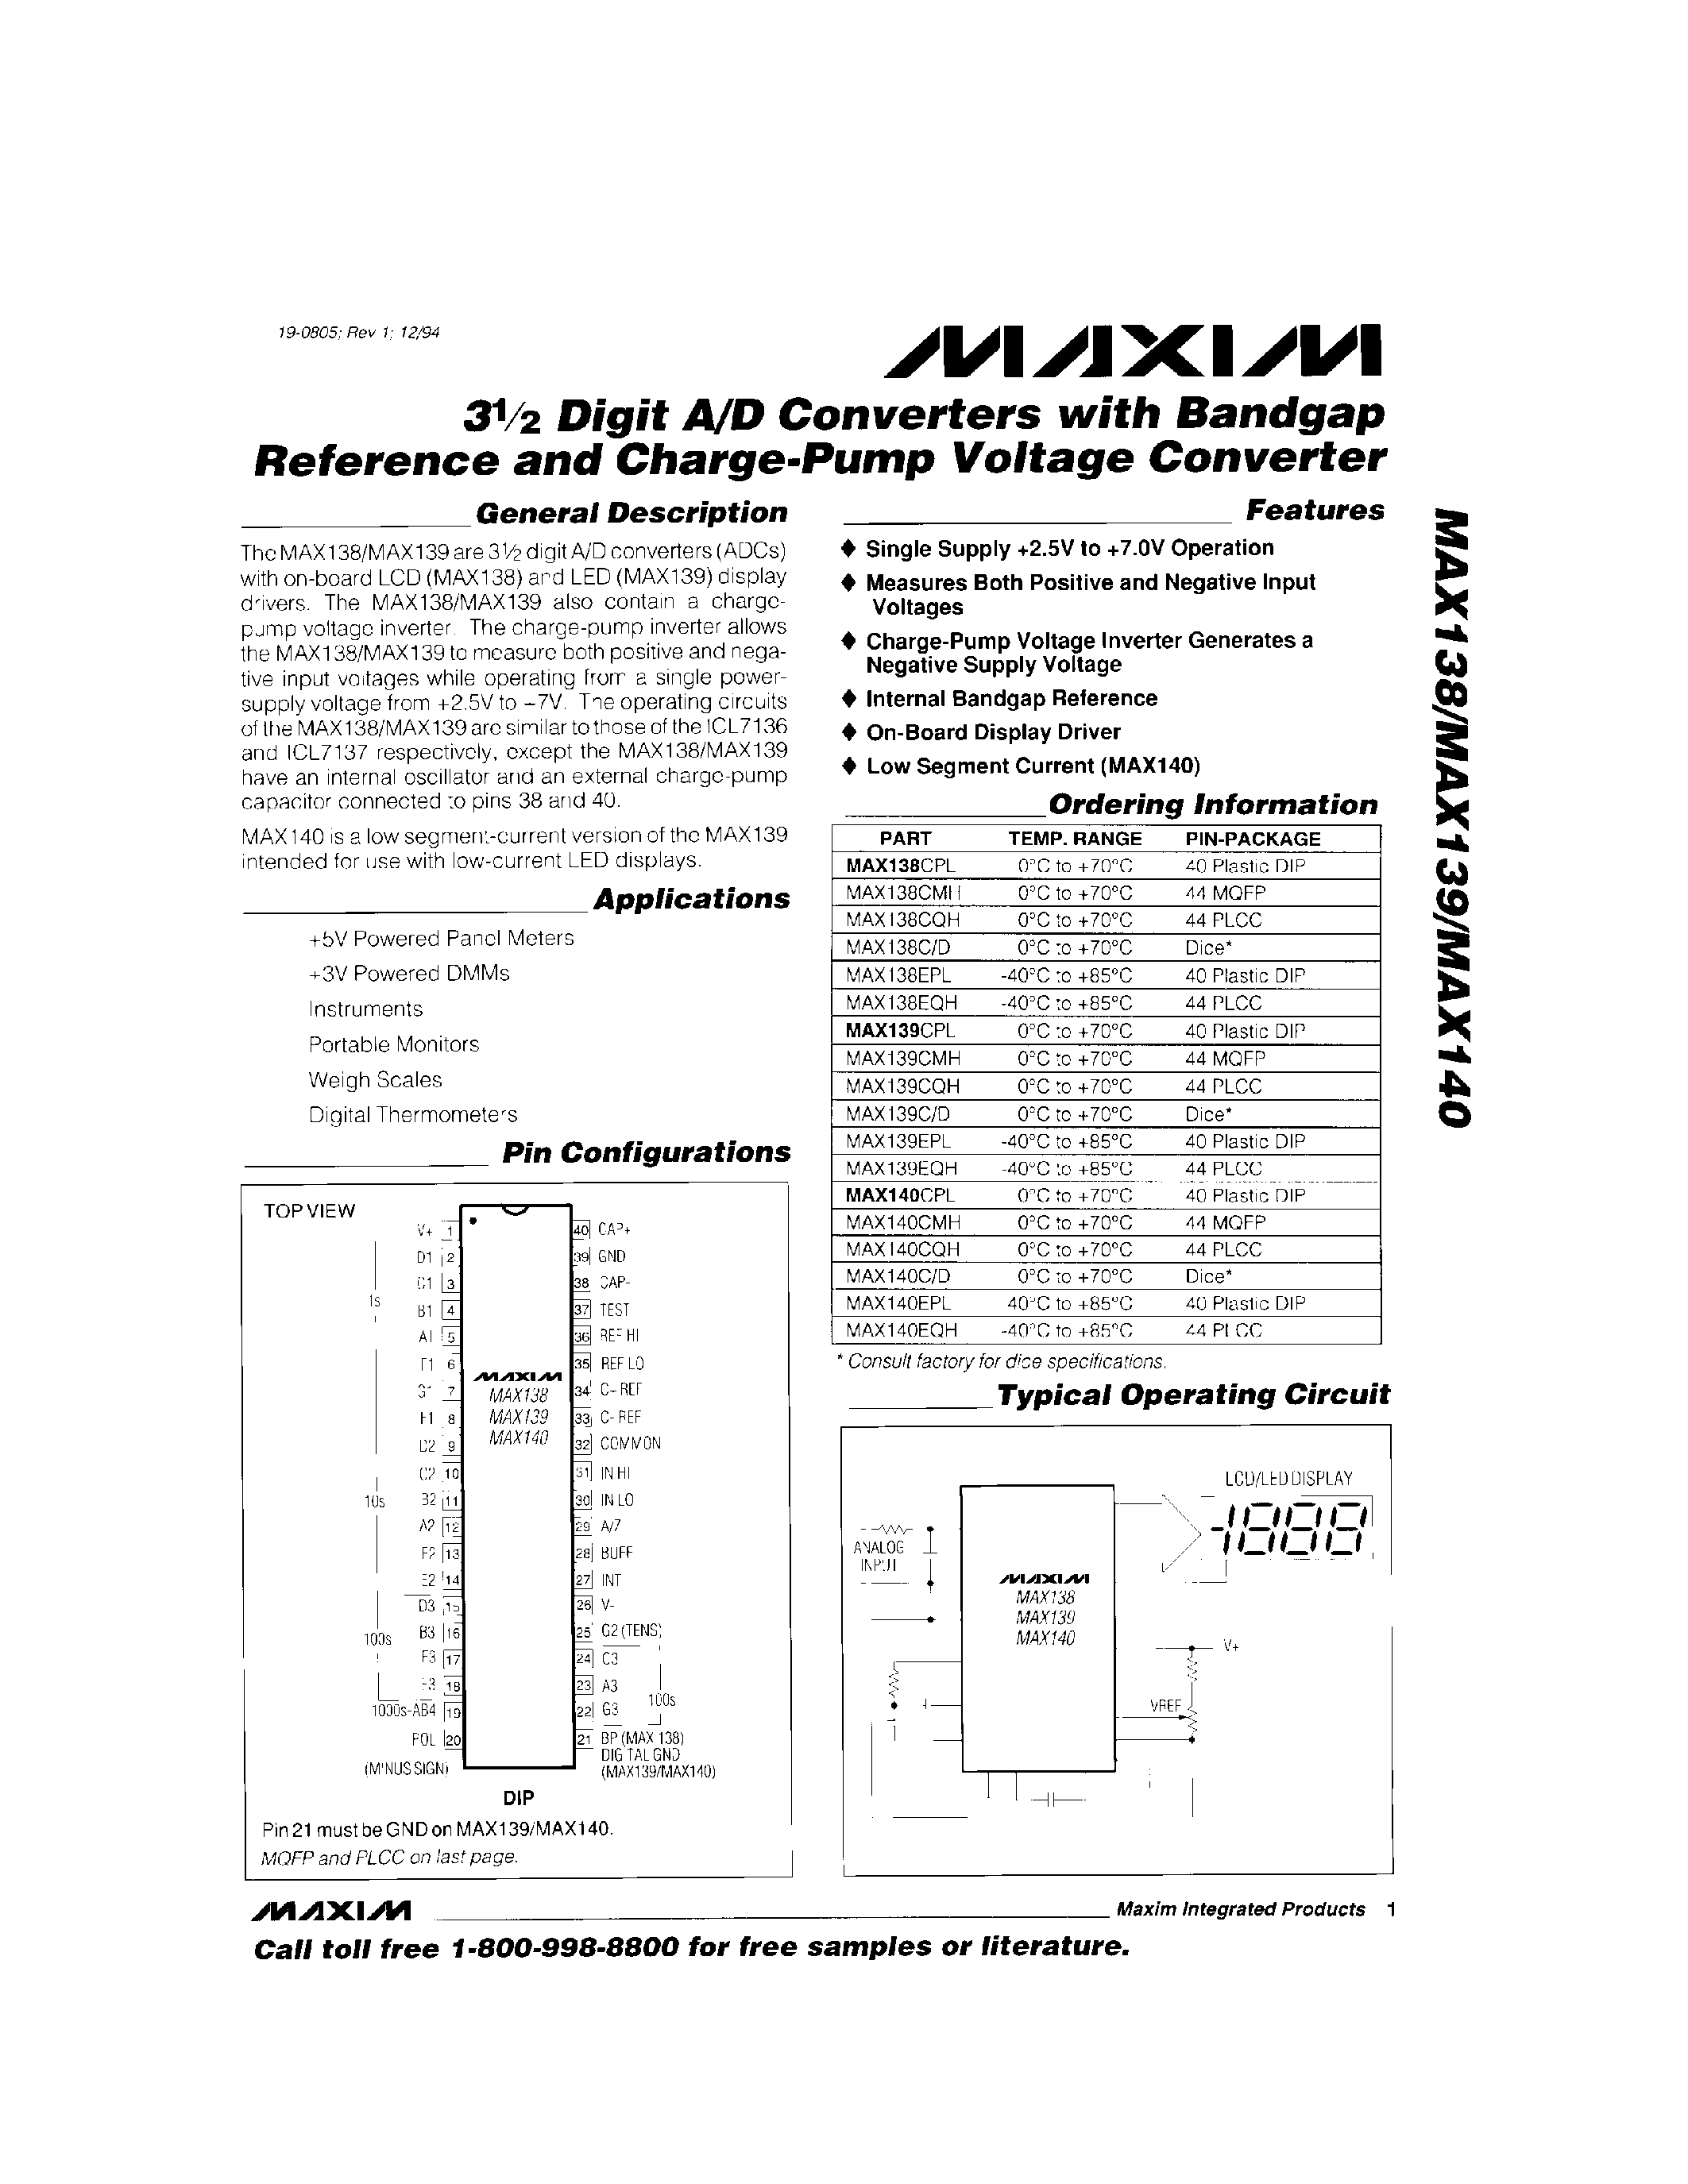 Datasheet MAX140C/D - 3Digit A/D Converters with Bandgap Refrence and Charge-Pump Voltage Converter page 1